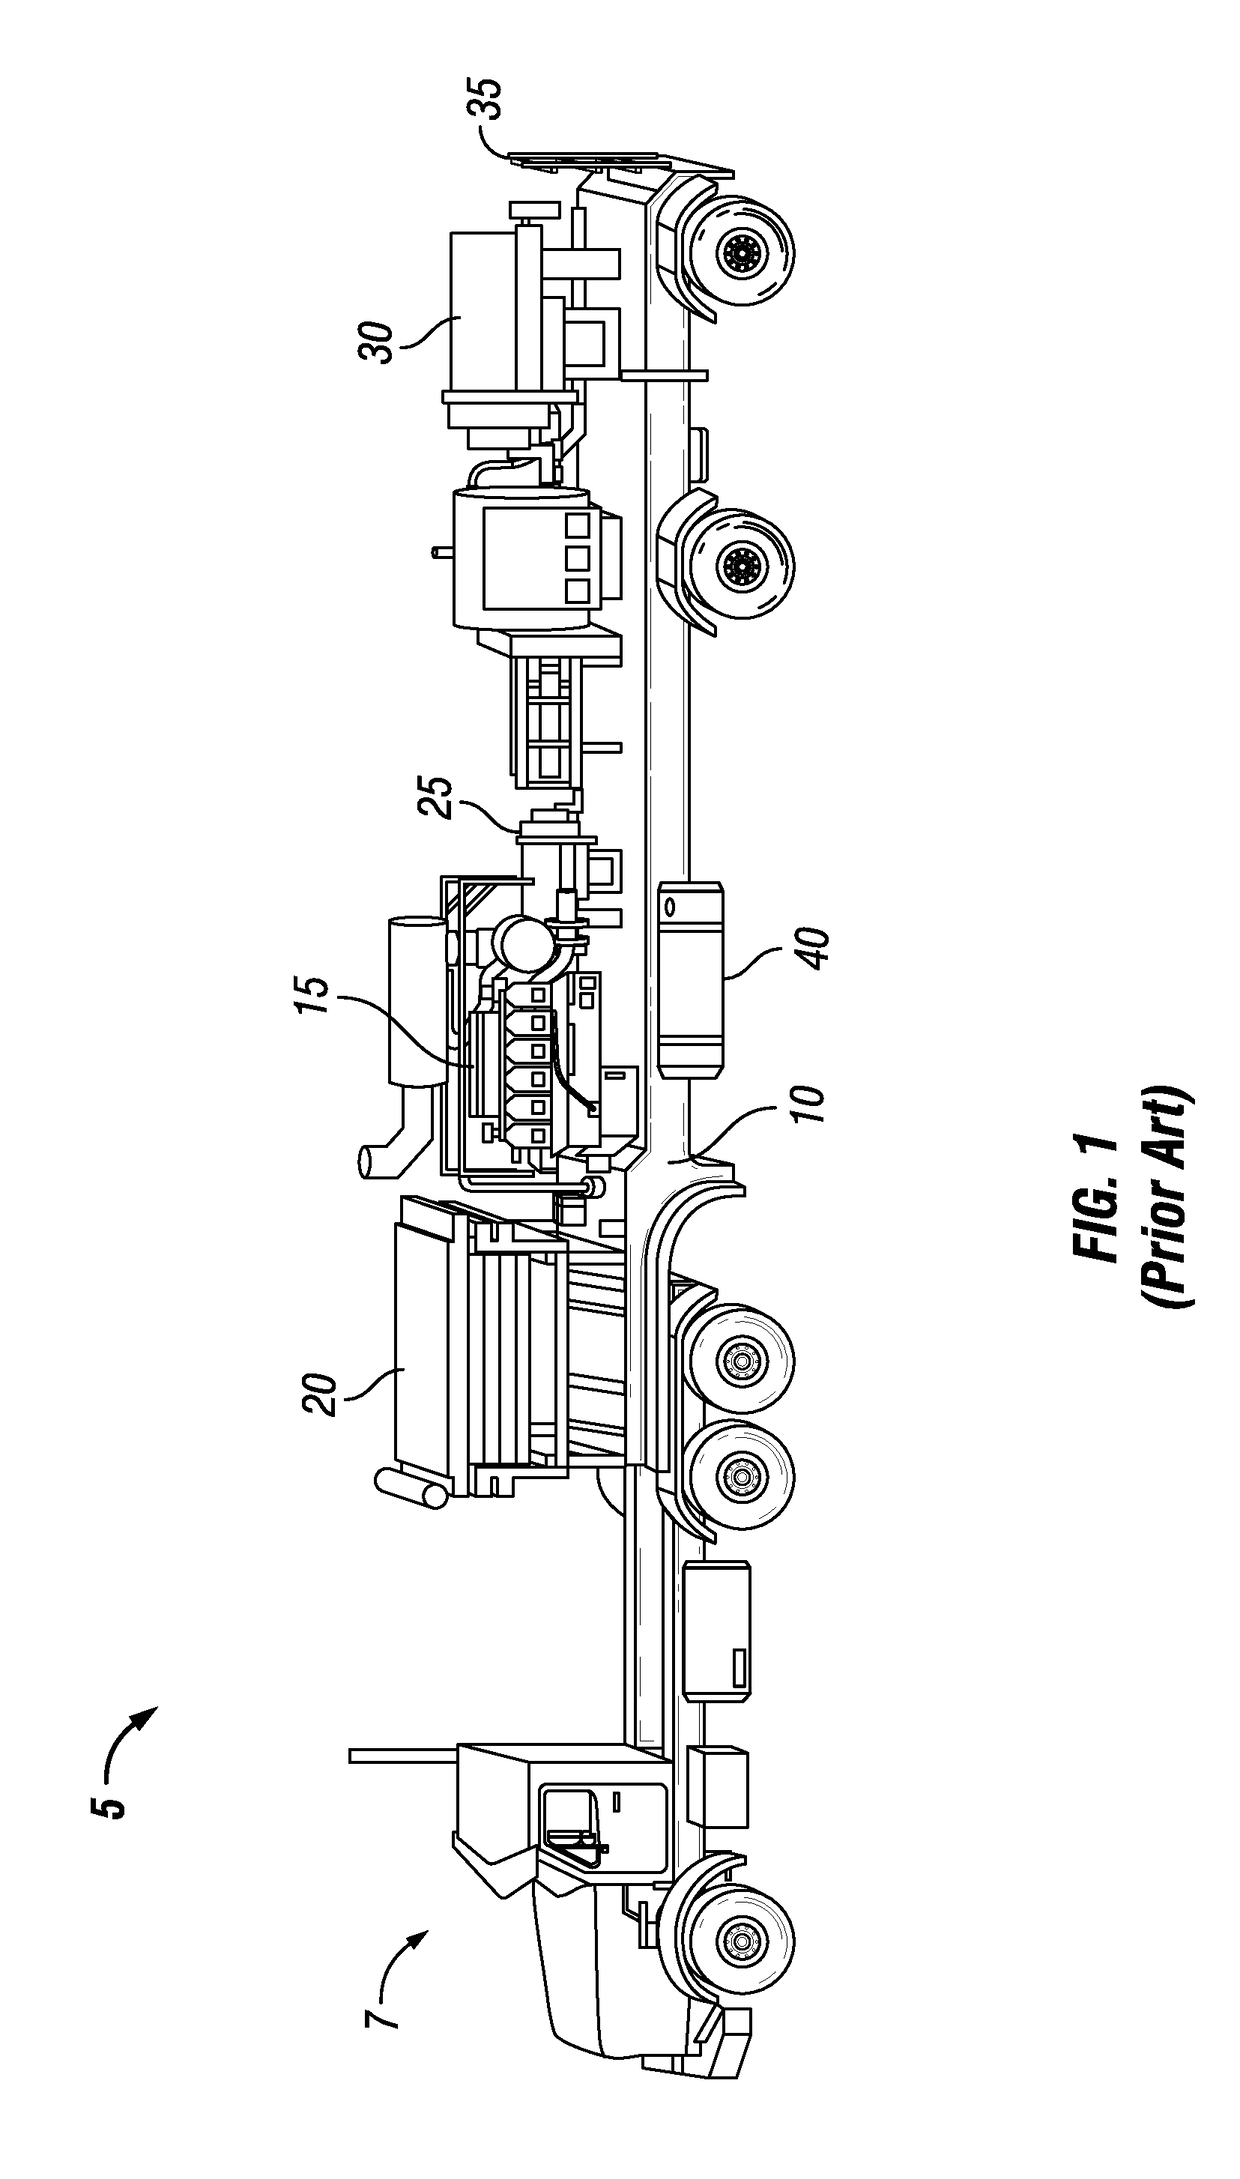 Equipment, system and method for delivery of high pressure fluid